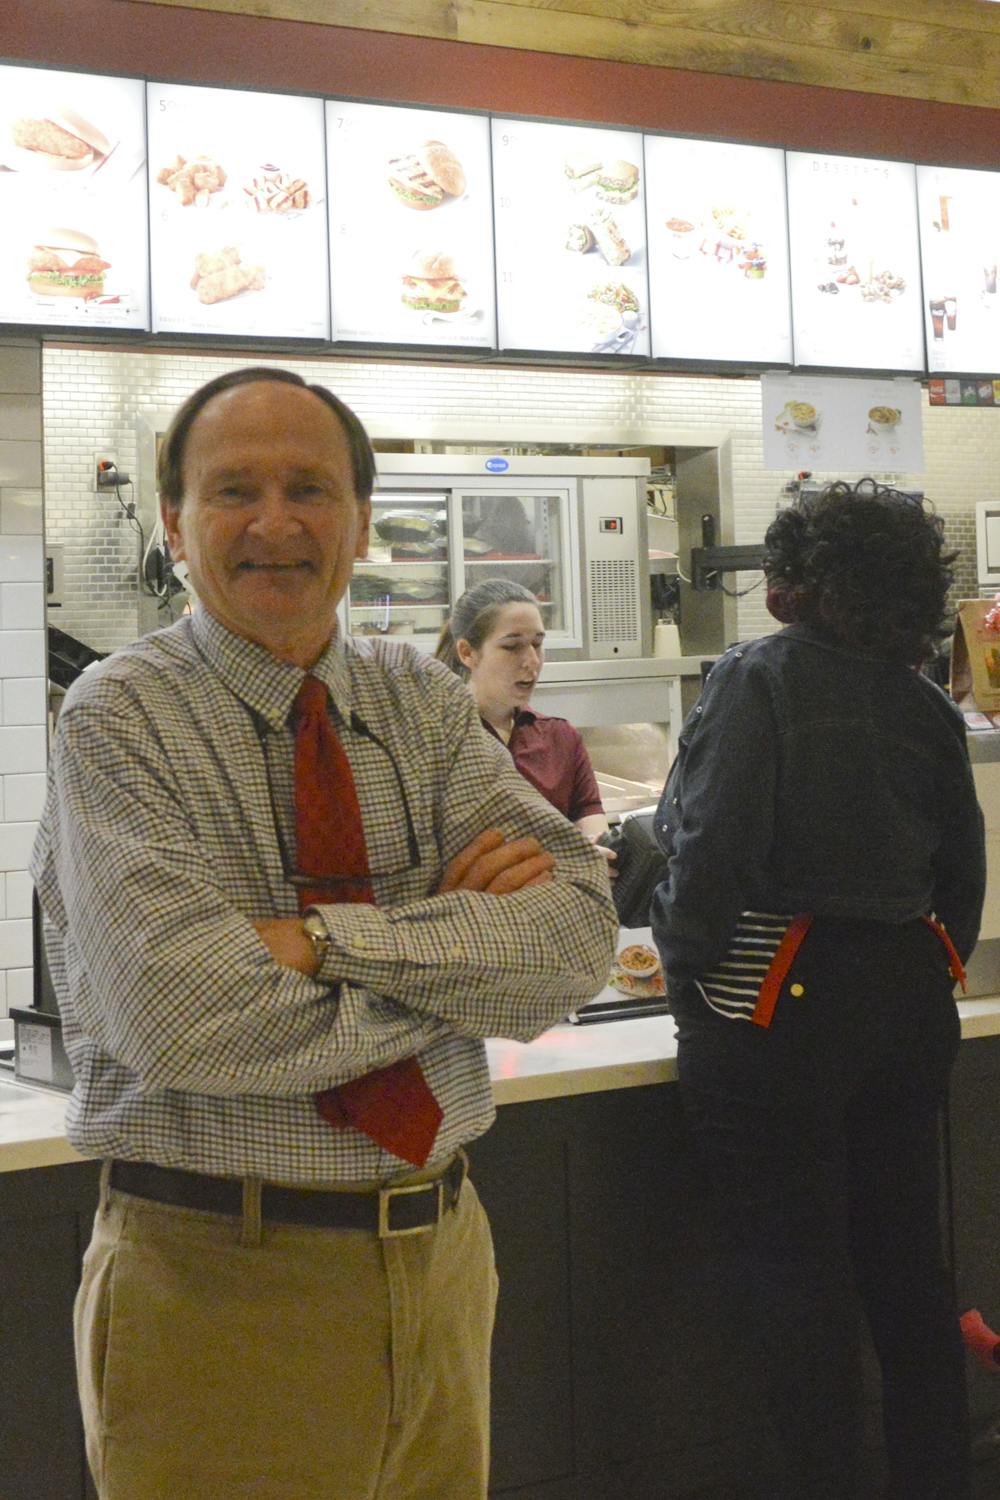 <p>Steve Carroll, owner of the Oaks Mall’s last locally owned store, stands in Chick-fil-a and poses for a picture. Carroll’s restaurant opened in 1978 and was one of the mall’s original stores.</p>